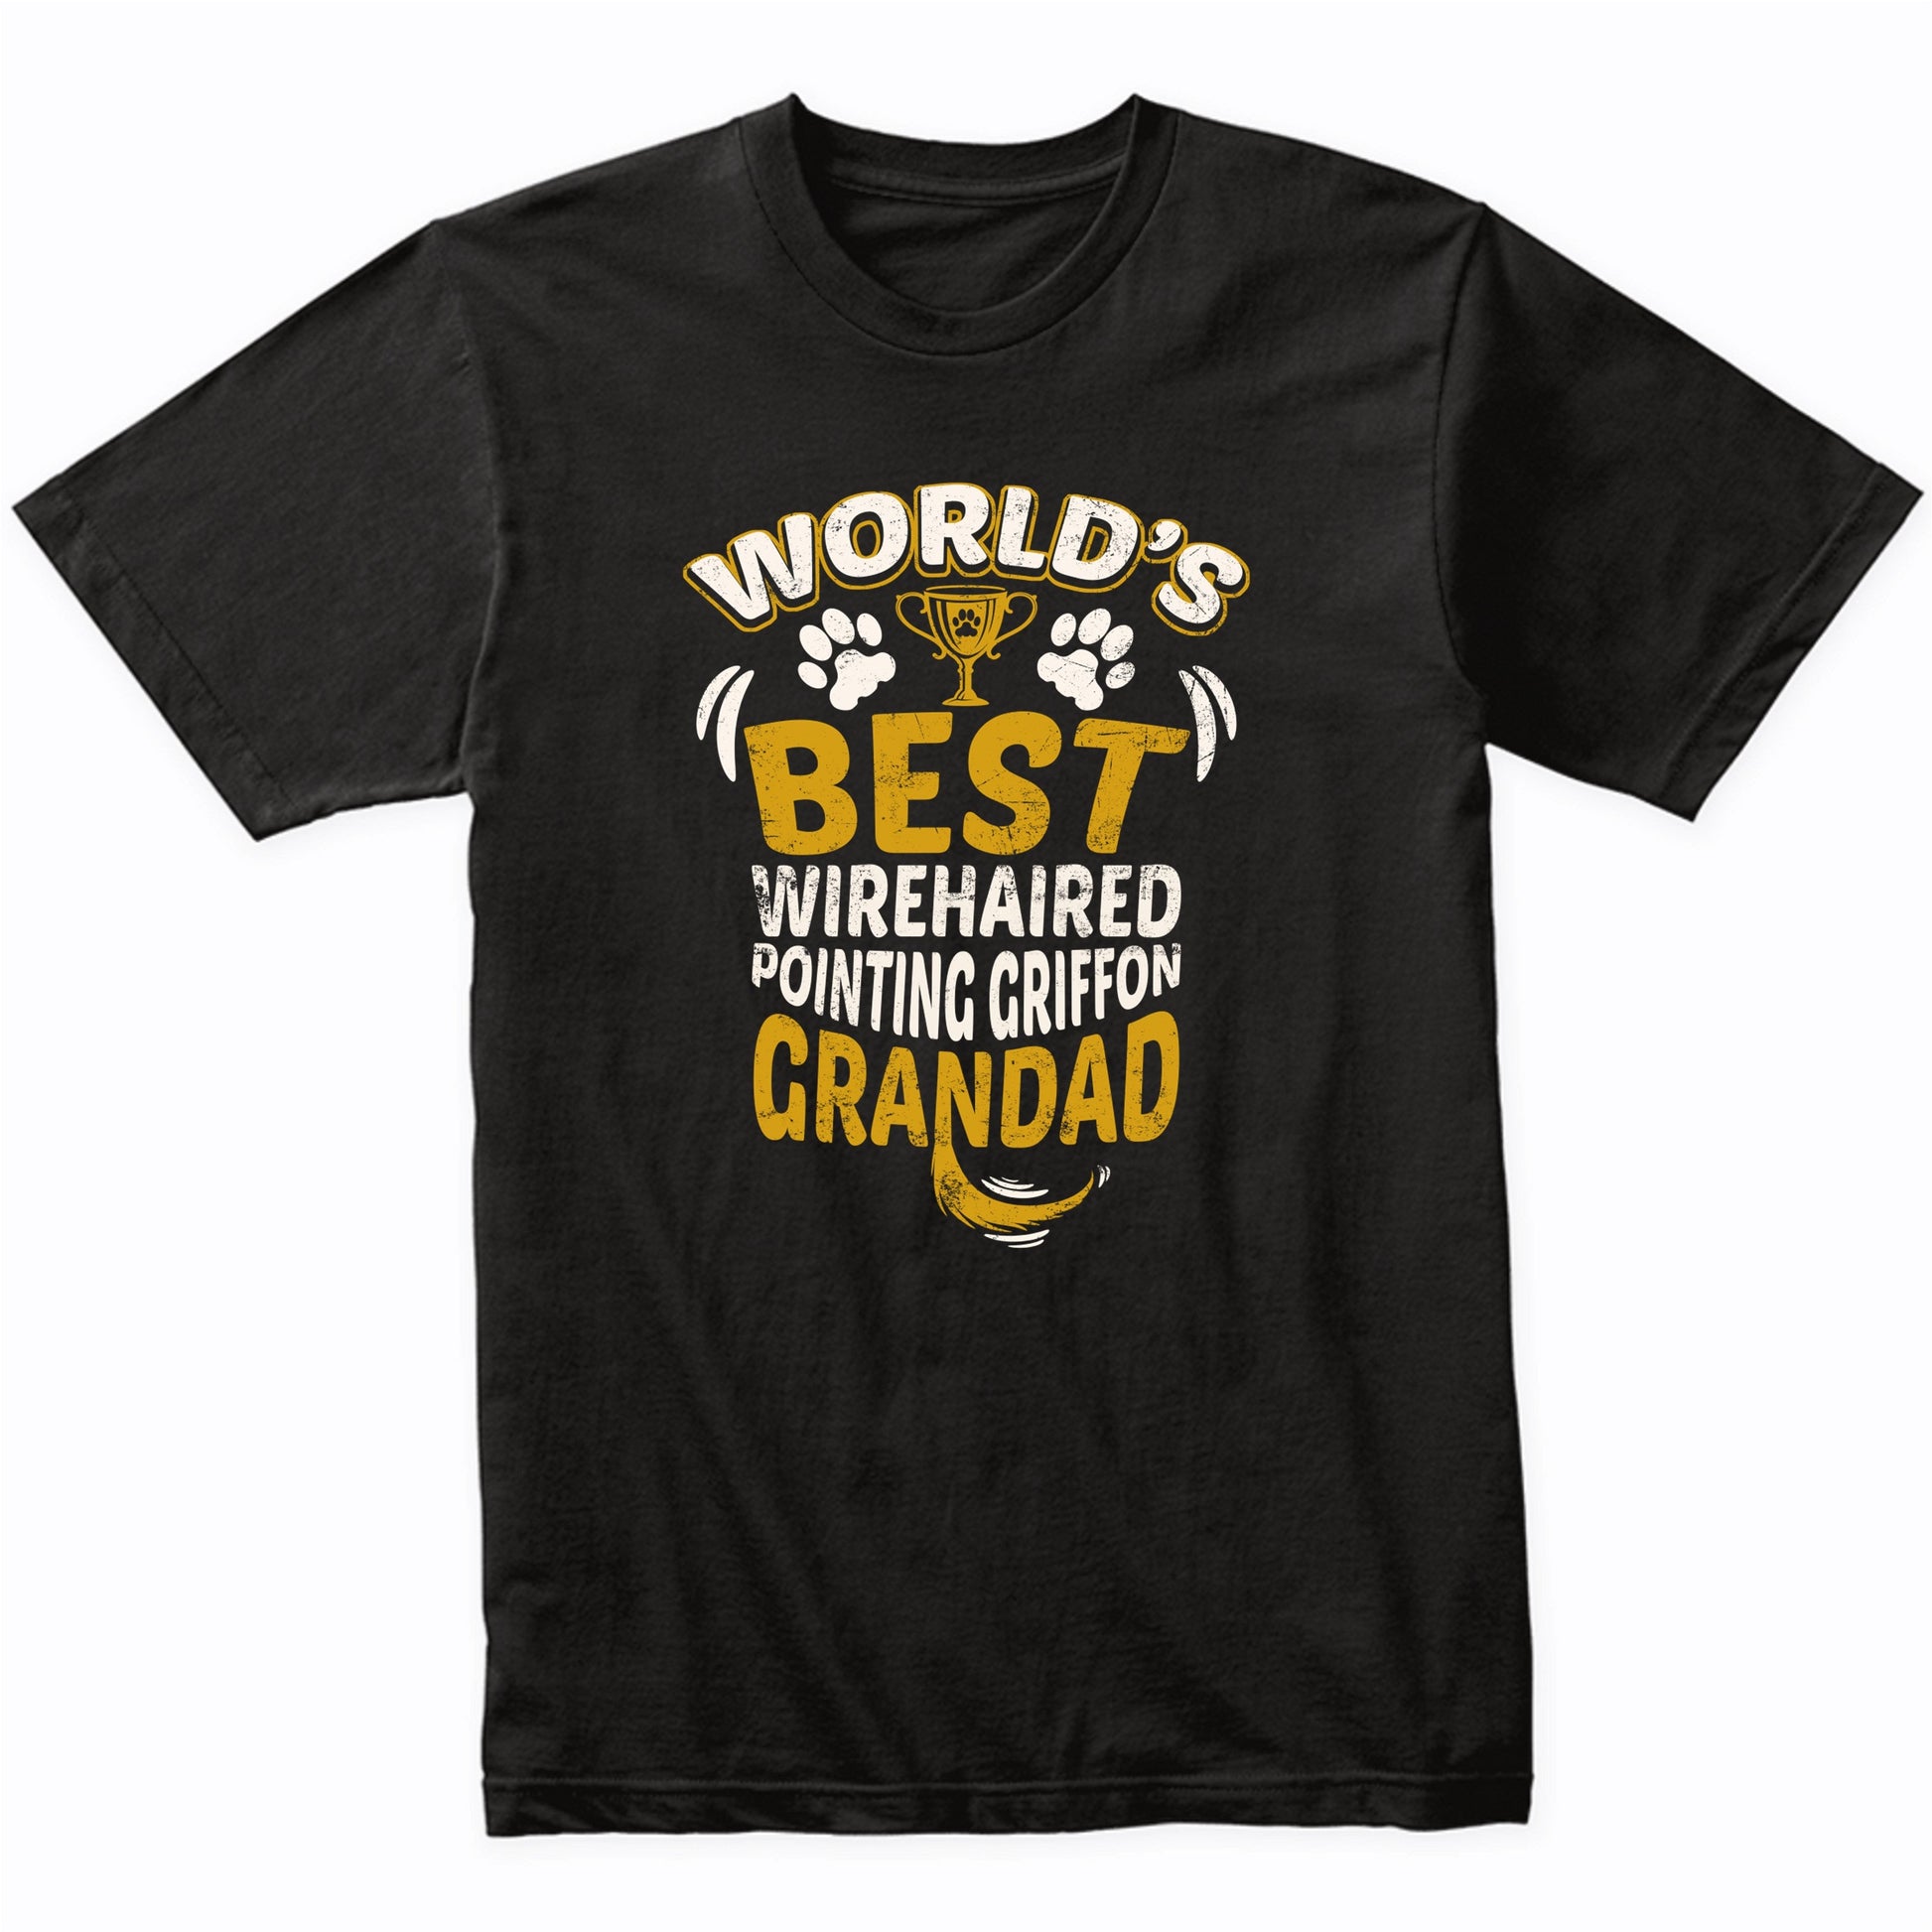 World's Best Wirehaired Pointing Griffon Grandad T-Shirt